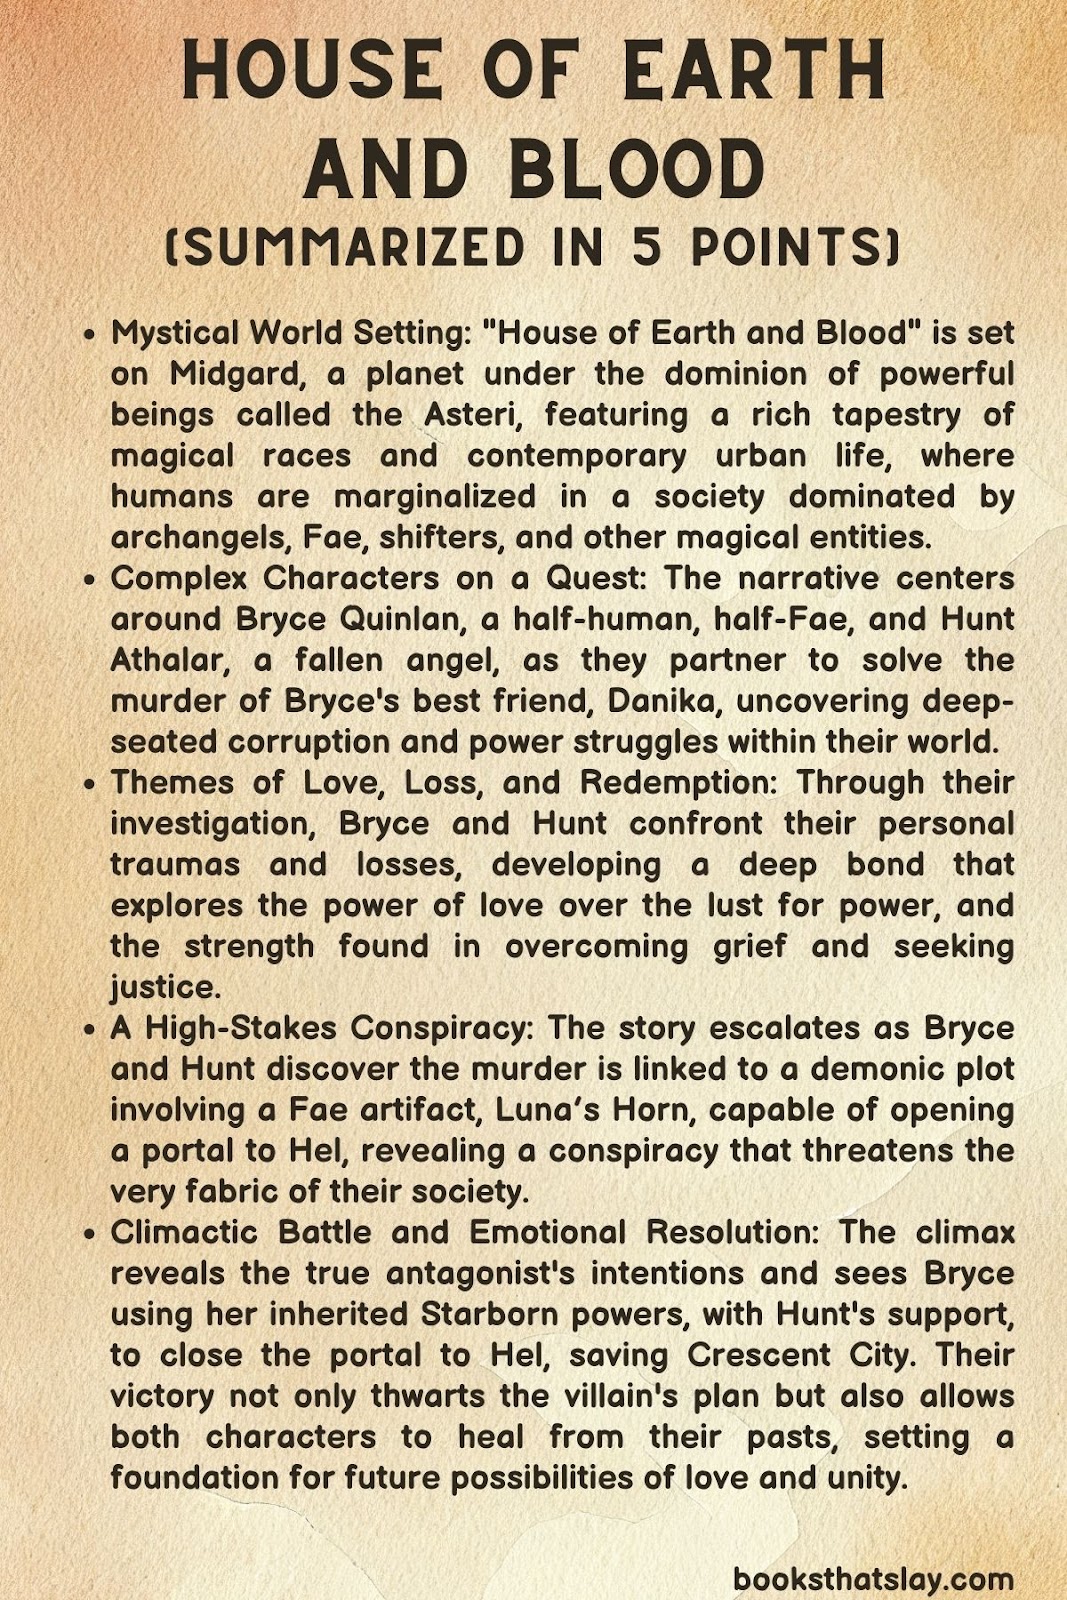 House of Earth and Blood Summary